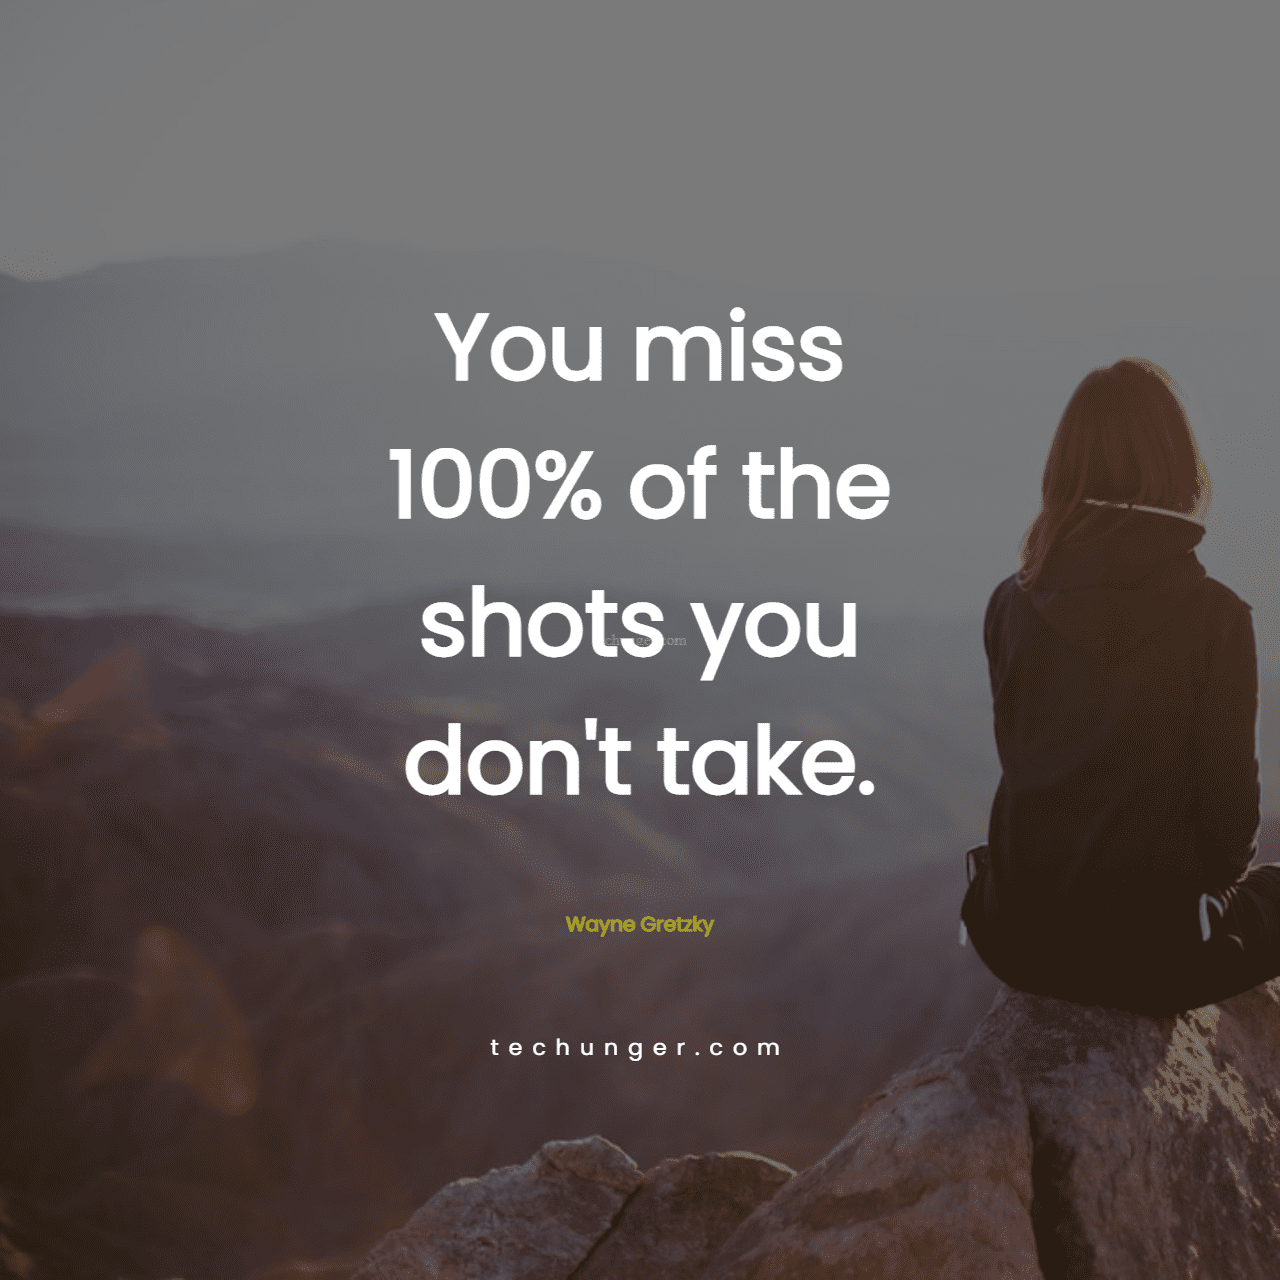 motivational,inspirational,quotes,You miss 100% of the shots you don't take.Wayne Gretzky